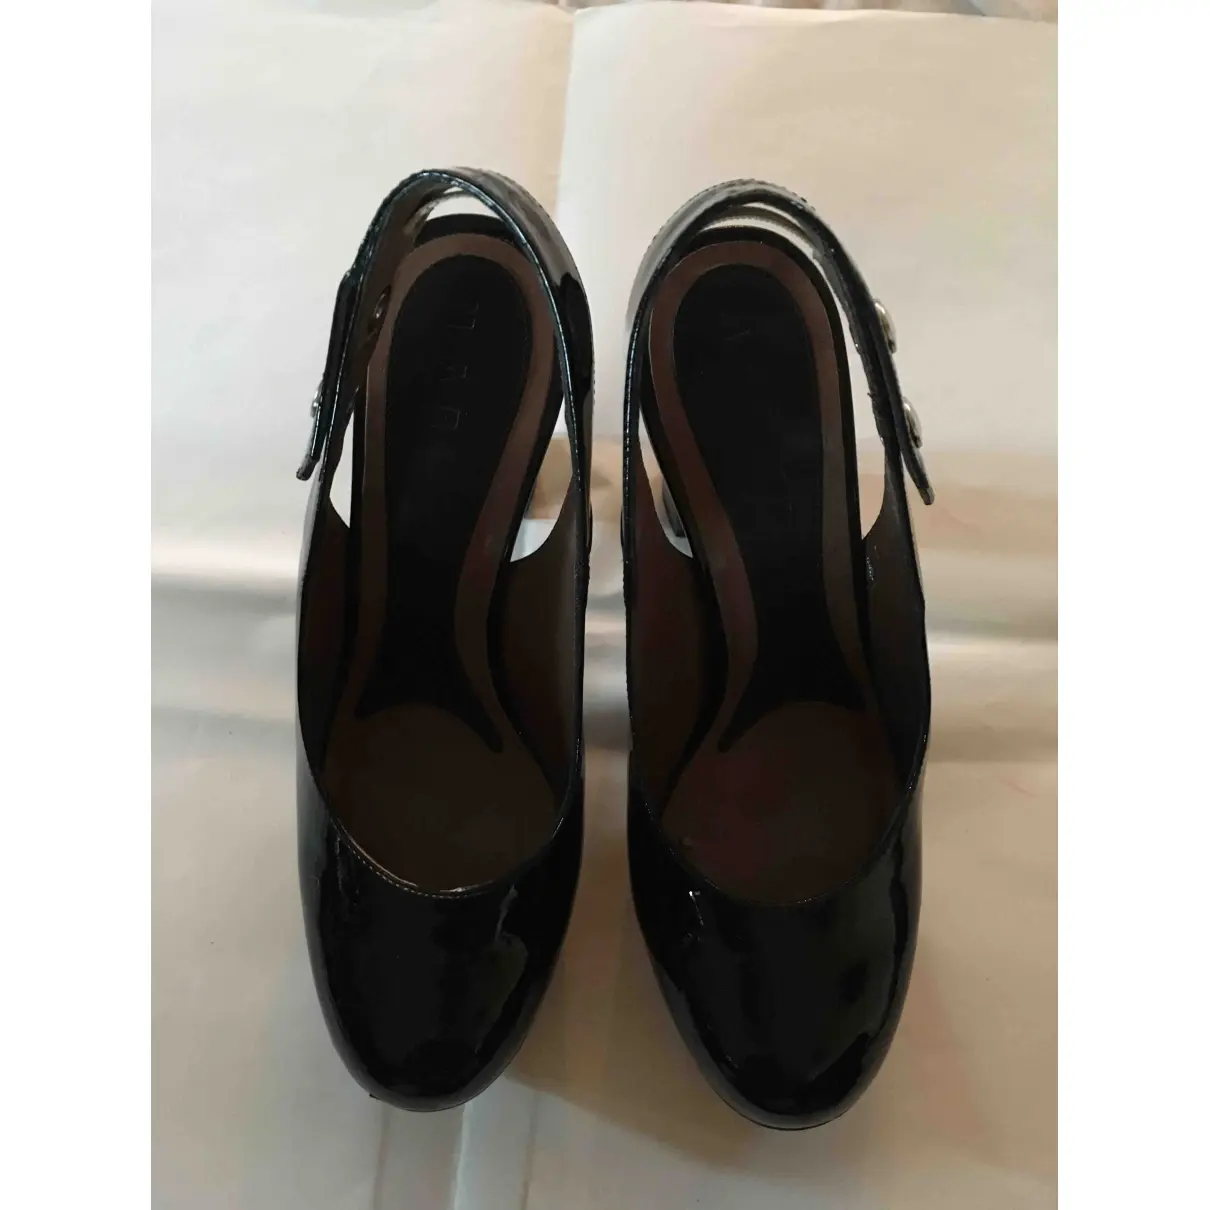 Buy Marni Patent leather heels online